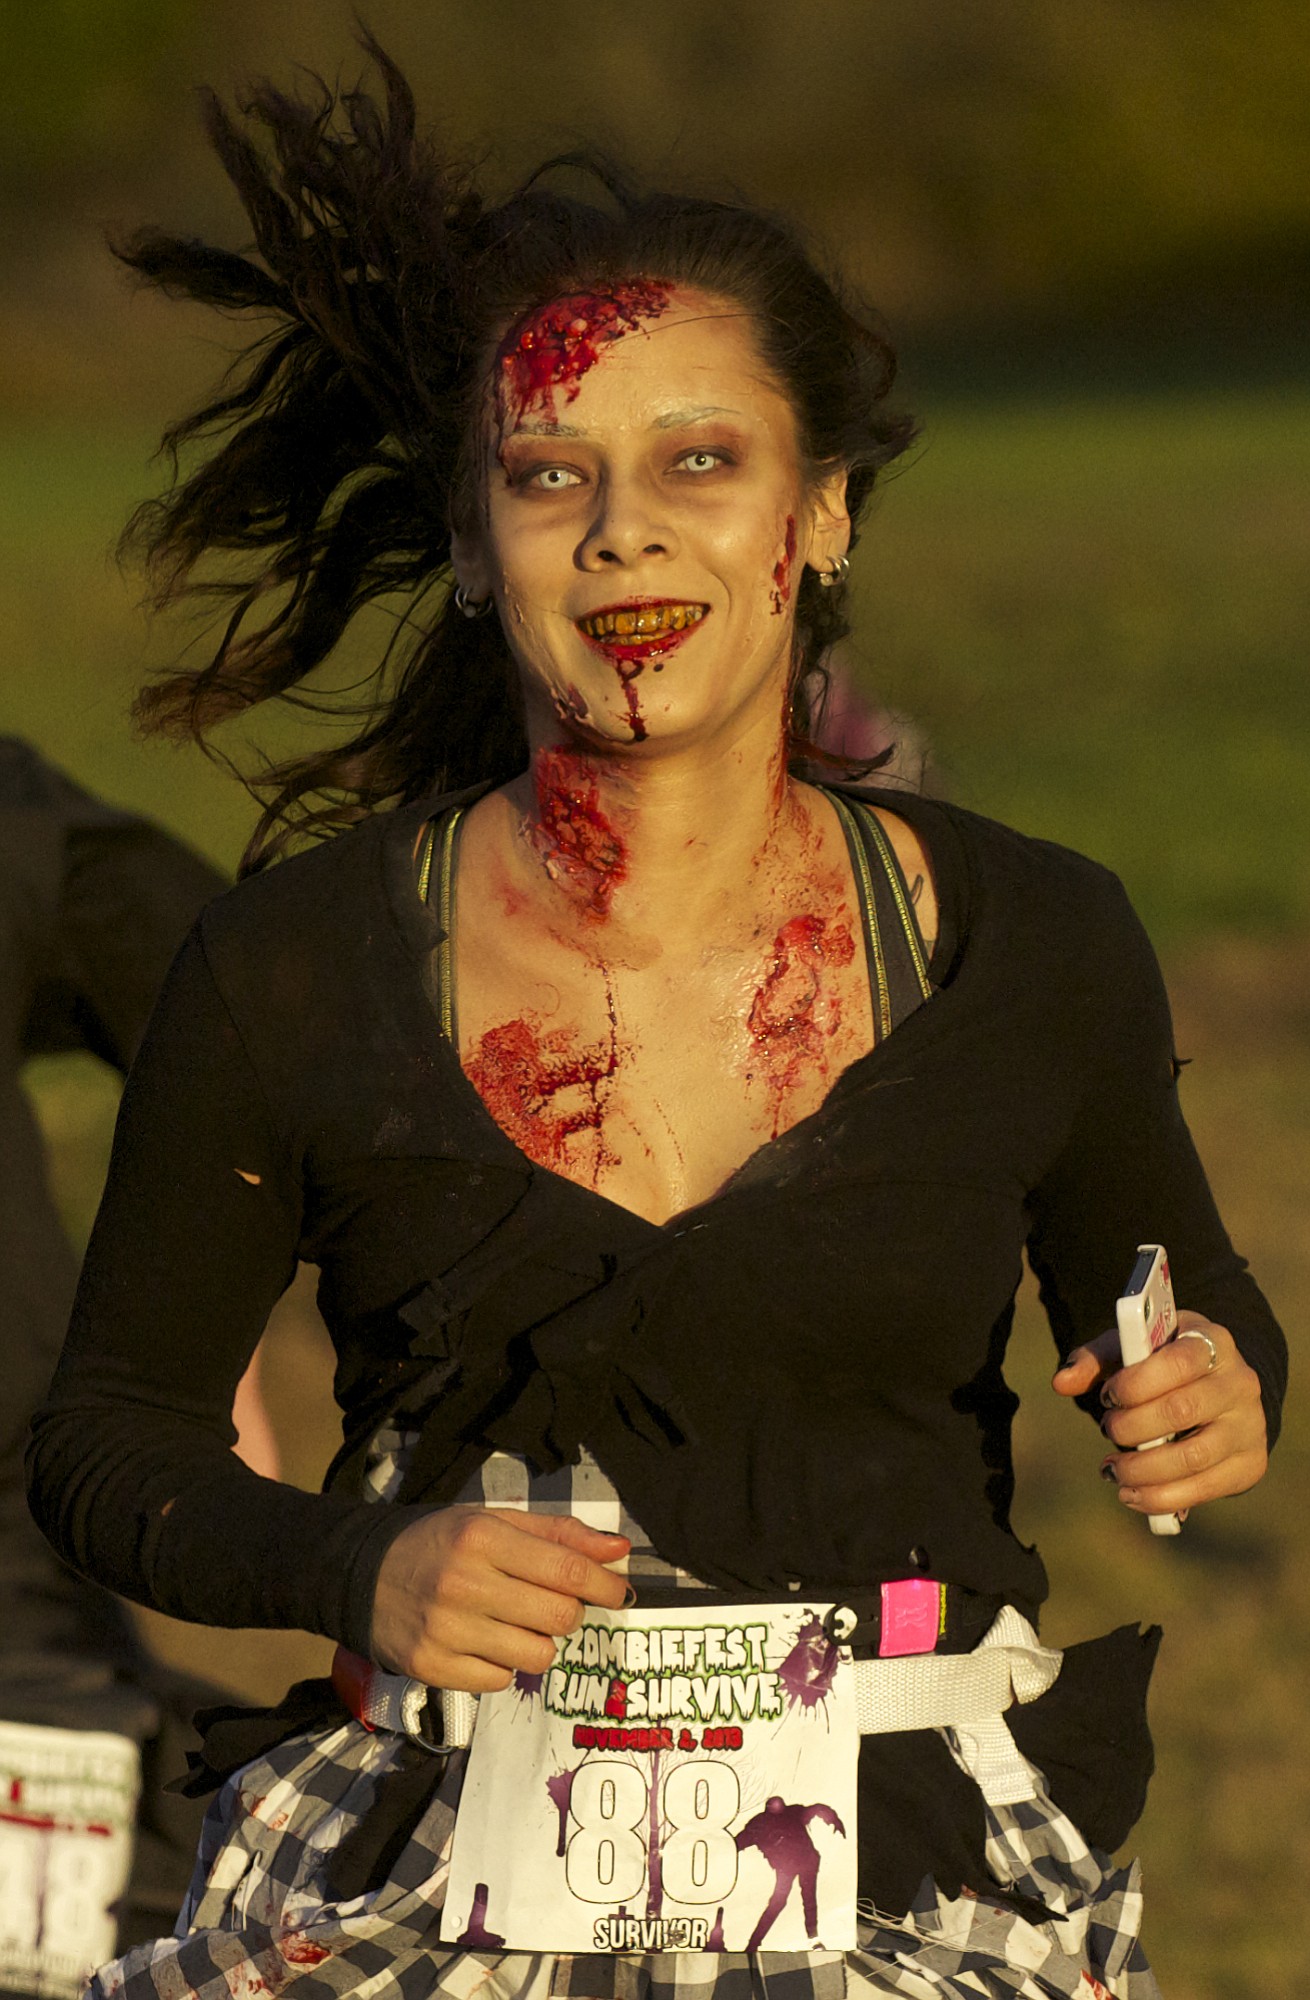 Marilyn Tycer, 28, of Vancouver said her spooky-looking contact lenses blurred her peripheral vision during the Run2Survive race Saturday.